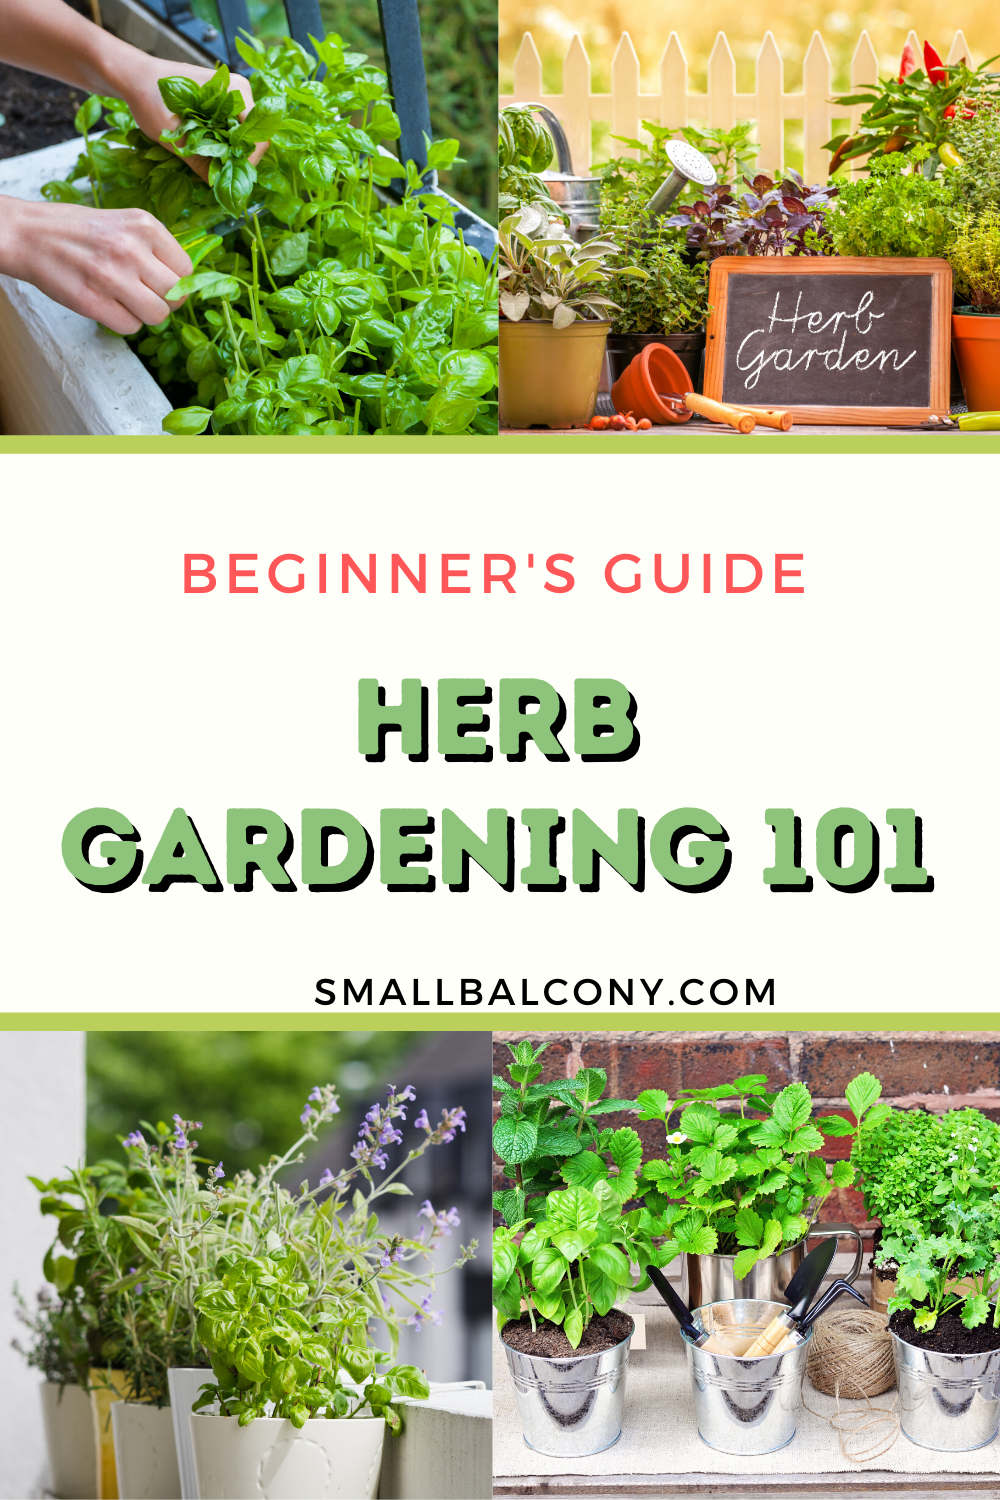 Beginner's Guide to Growing Herbs on a Small Balcony -   19 plants Balcony articles ideas